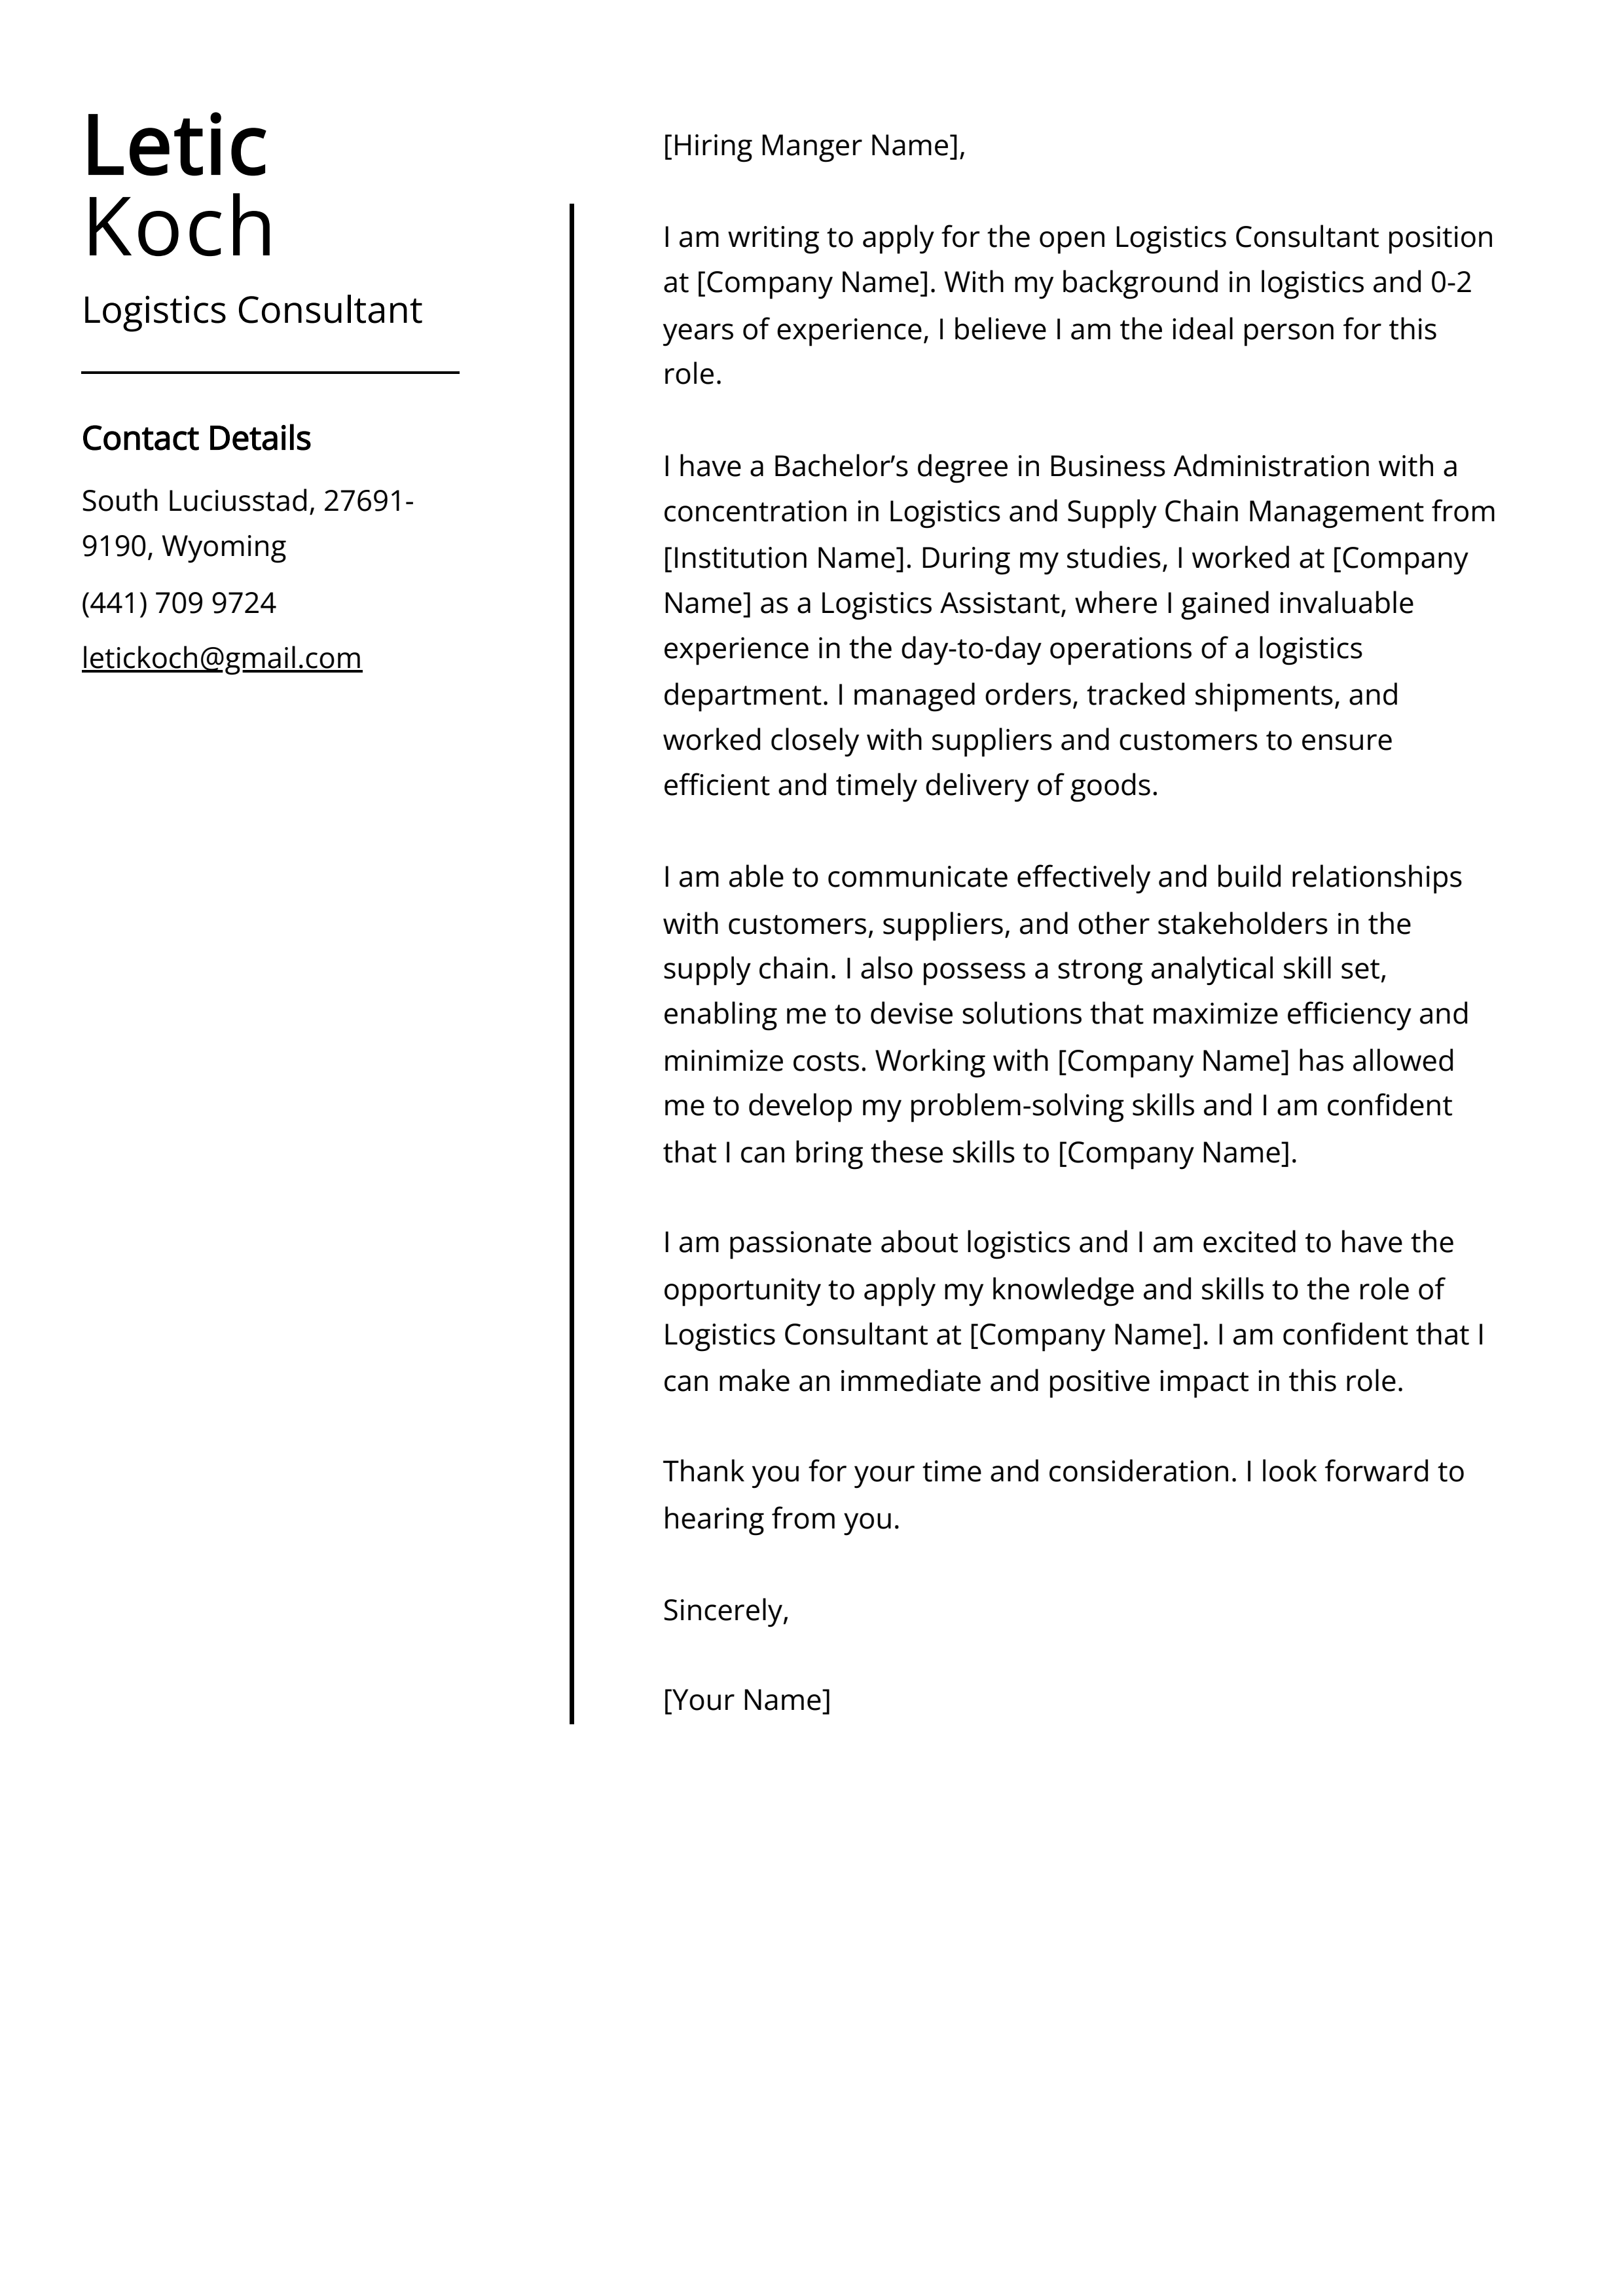 Logistics Consultant Cover Letter Example